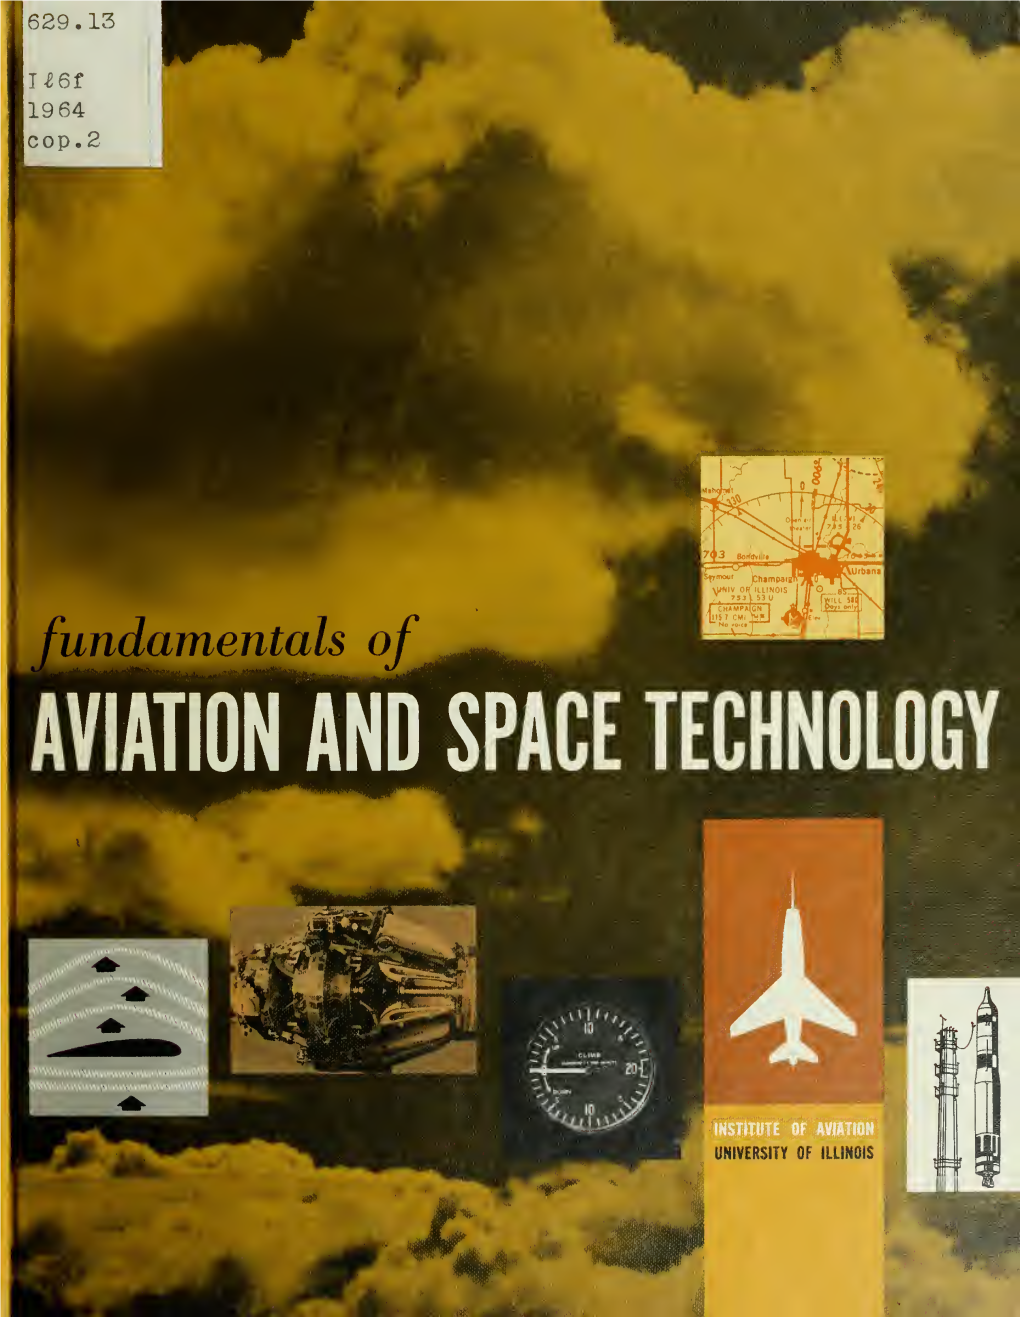 Fundamentals of Aviation and Space Technology." E